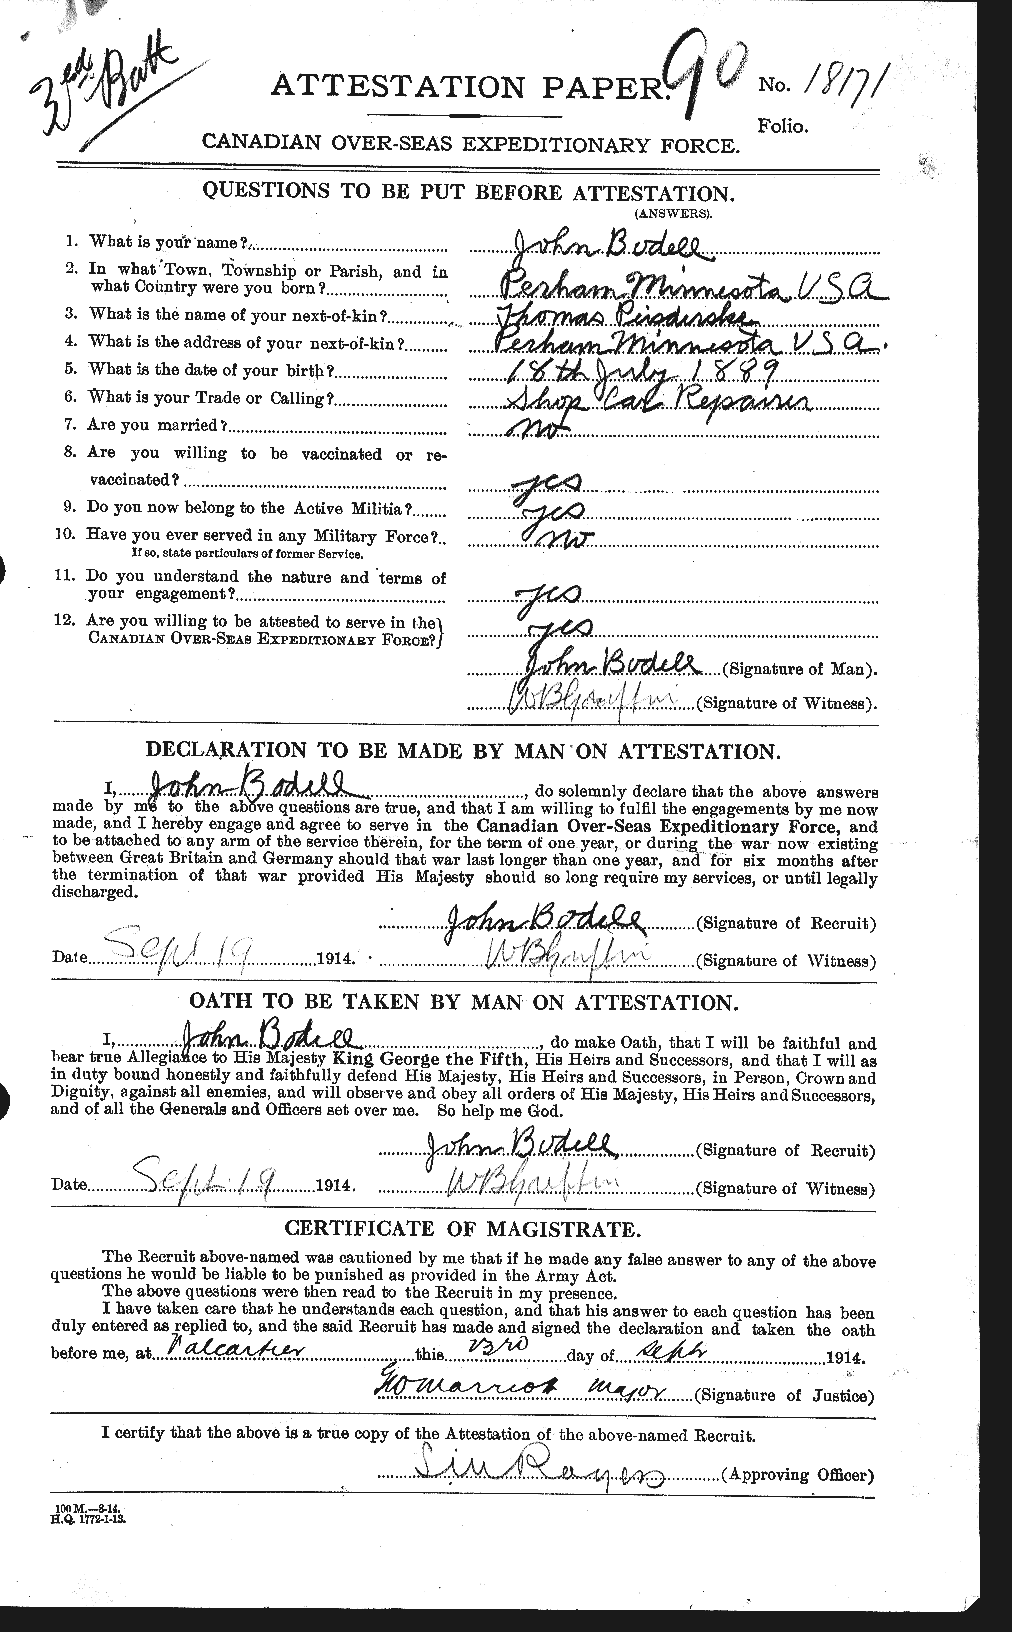 Personnel Records of the First World War - CEF 245212a